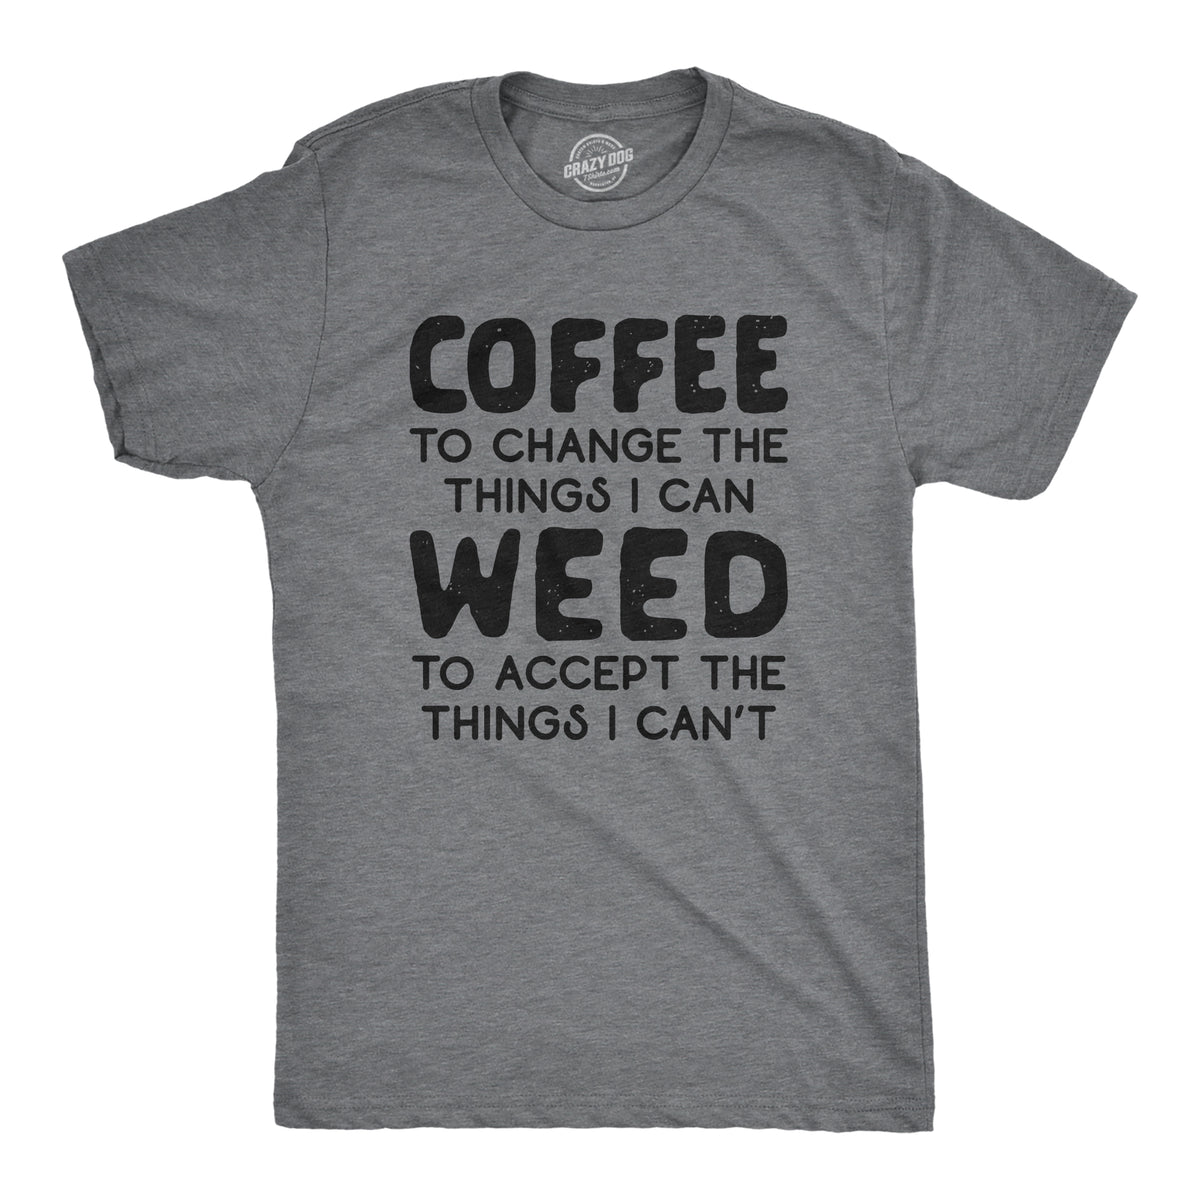 Funny Dark Heather Grey Coffee To Change The Things I Can Weed To Accept The Things I Can&#39;t Mens T Shirt Nerdy 420 Coffee Tee